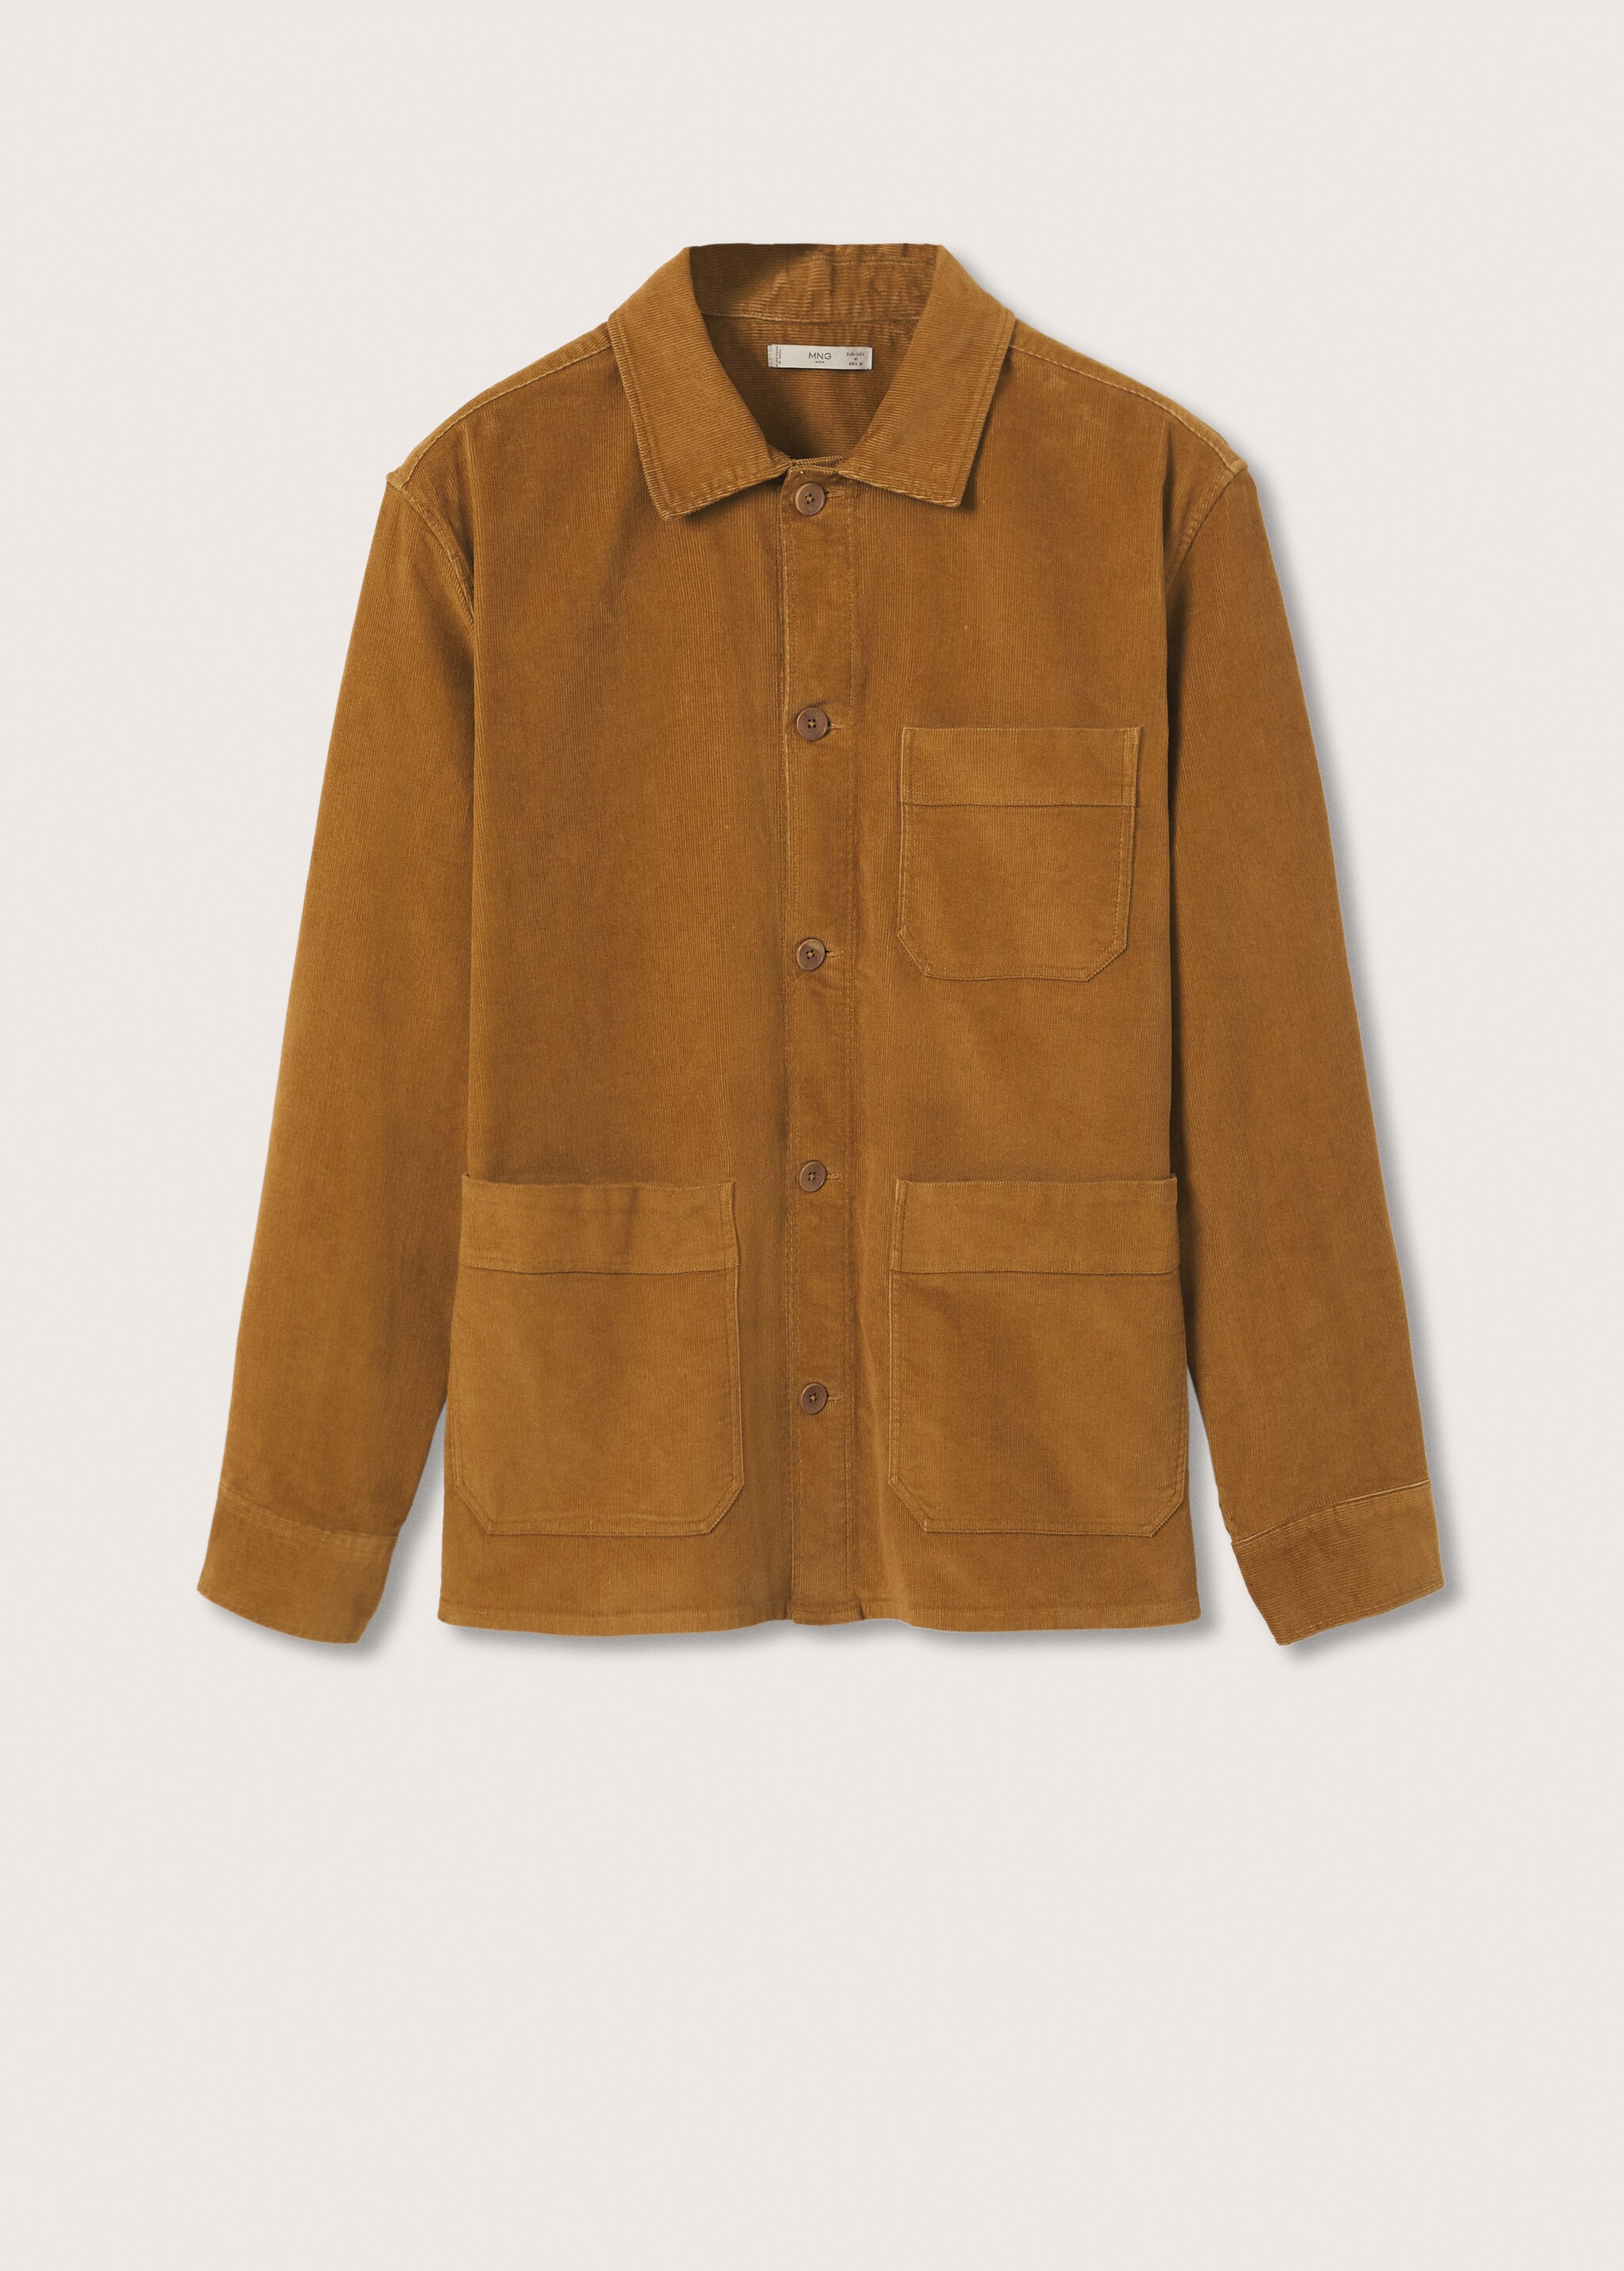 Worker corduroy overshirt - Article without model